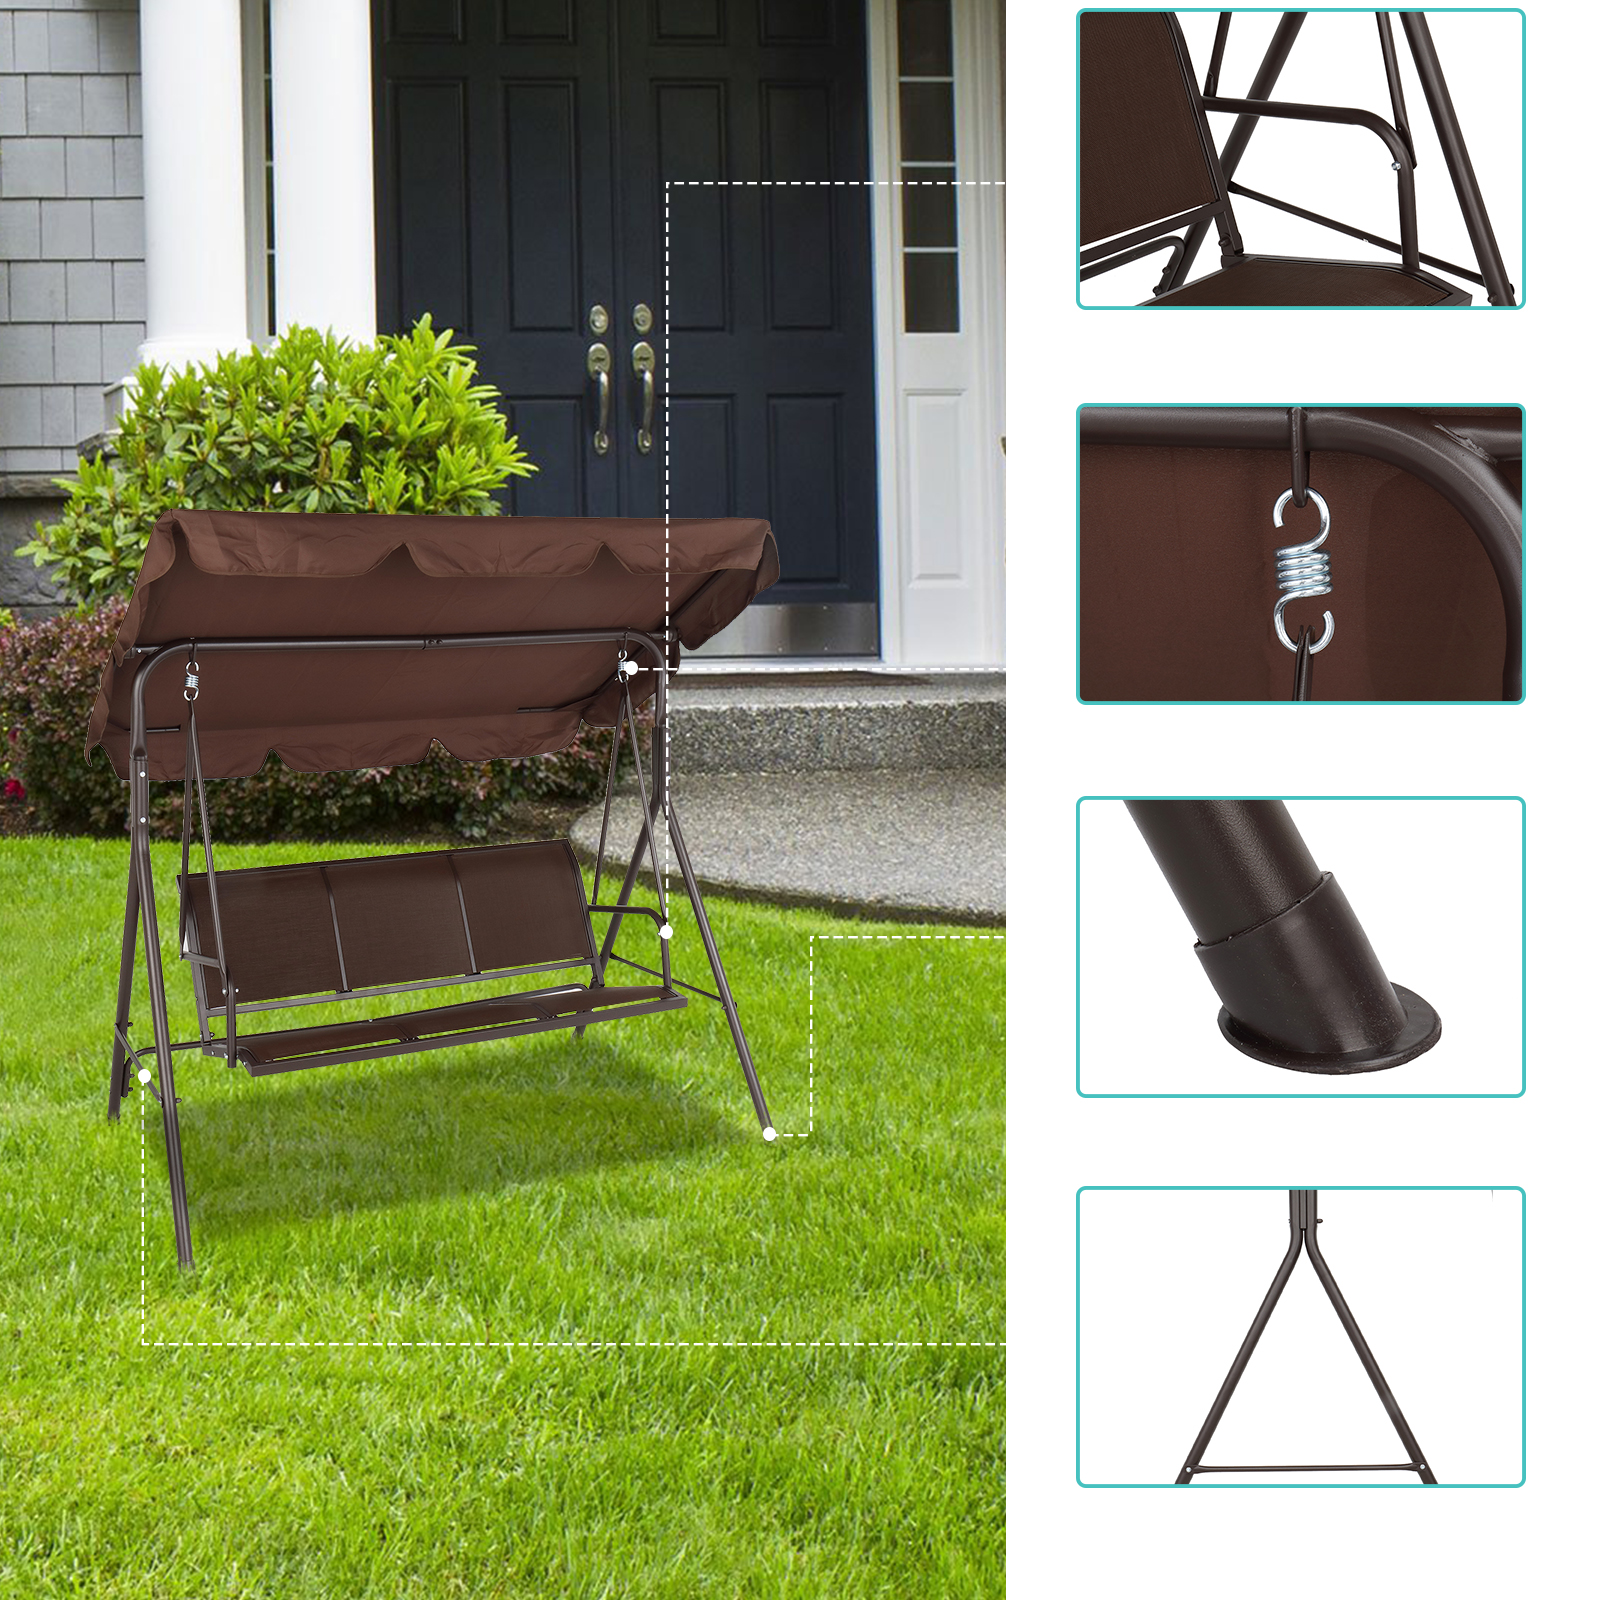 Goorabbit Swing Chair,Outdoor Hanging Bench,Swing Chair With Canopy Teslin Cushion 550lbs Load-Bearing Iron,66.93x 59.84x 26.35",Brown - image 4 of 14